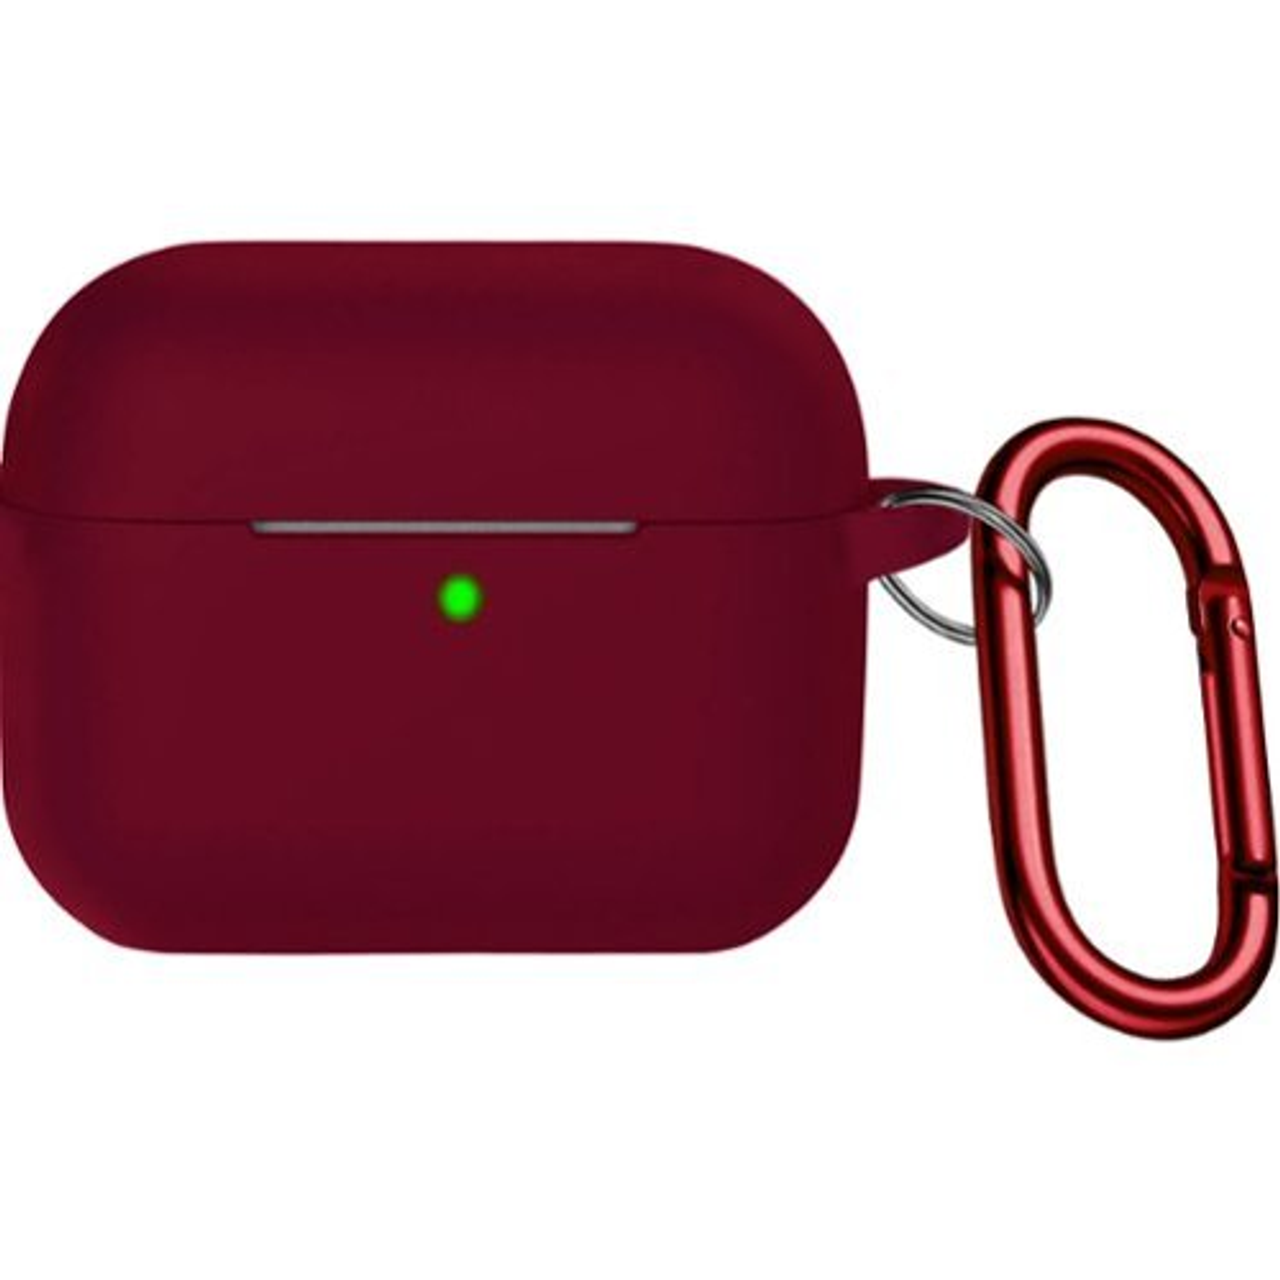 SaharaCase - Venture Series Silicone Combo Kit Case for Apple AirPods (3rd Generation) - Burgundy